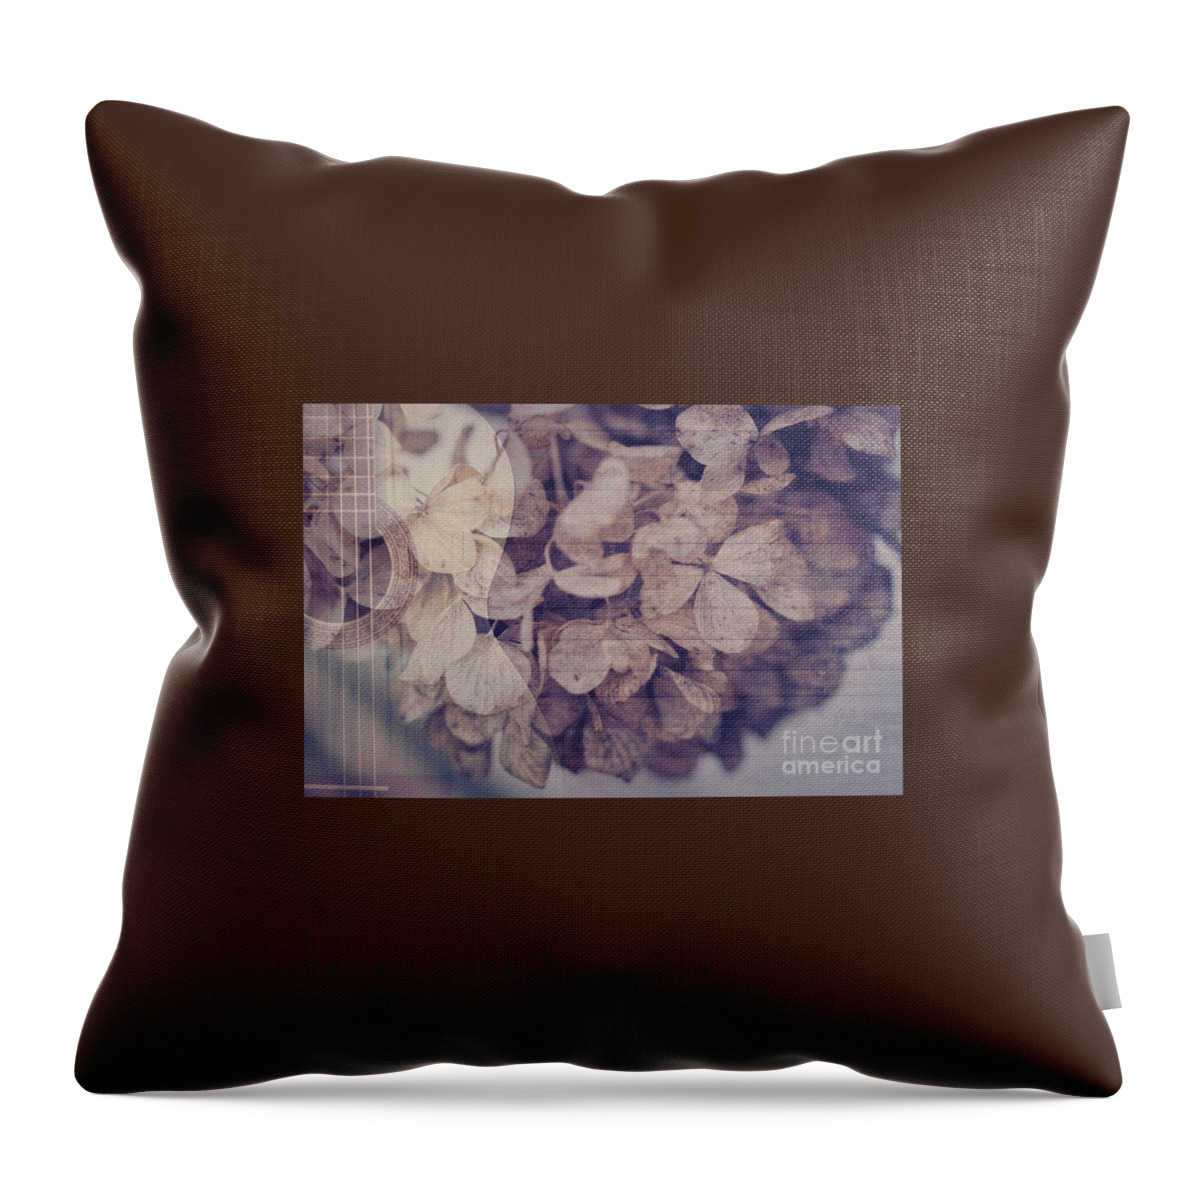 Hydrangeas Throw Pillow featuring the mixed media Playing Last Year's Music by Sherry Hallemeier